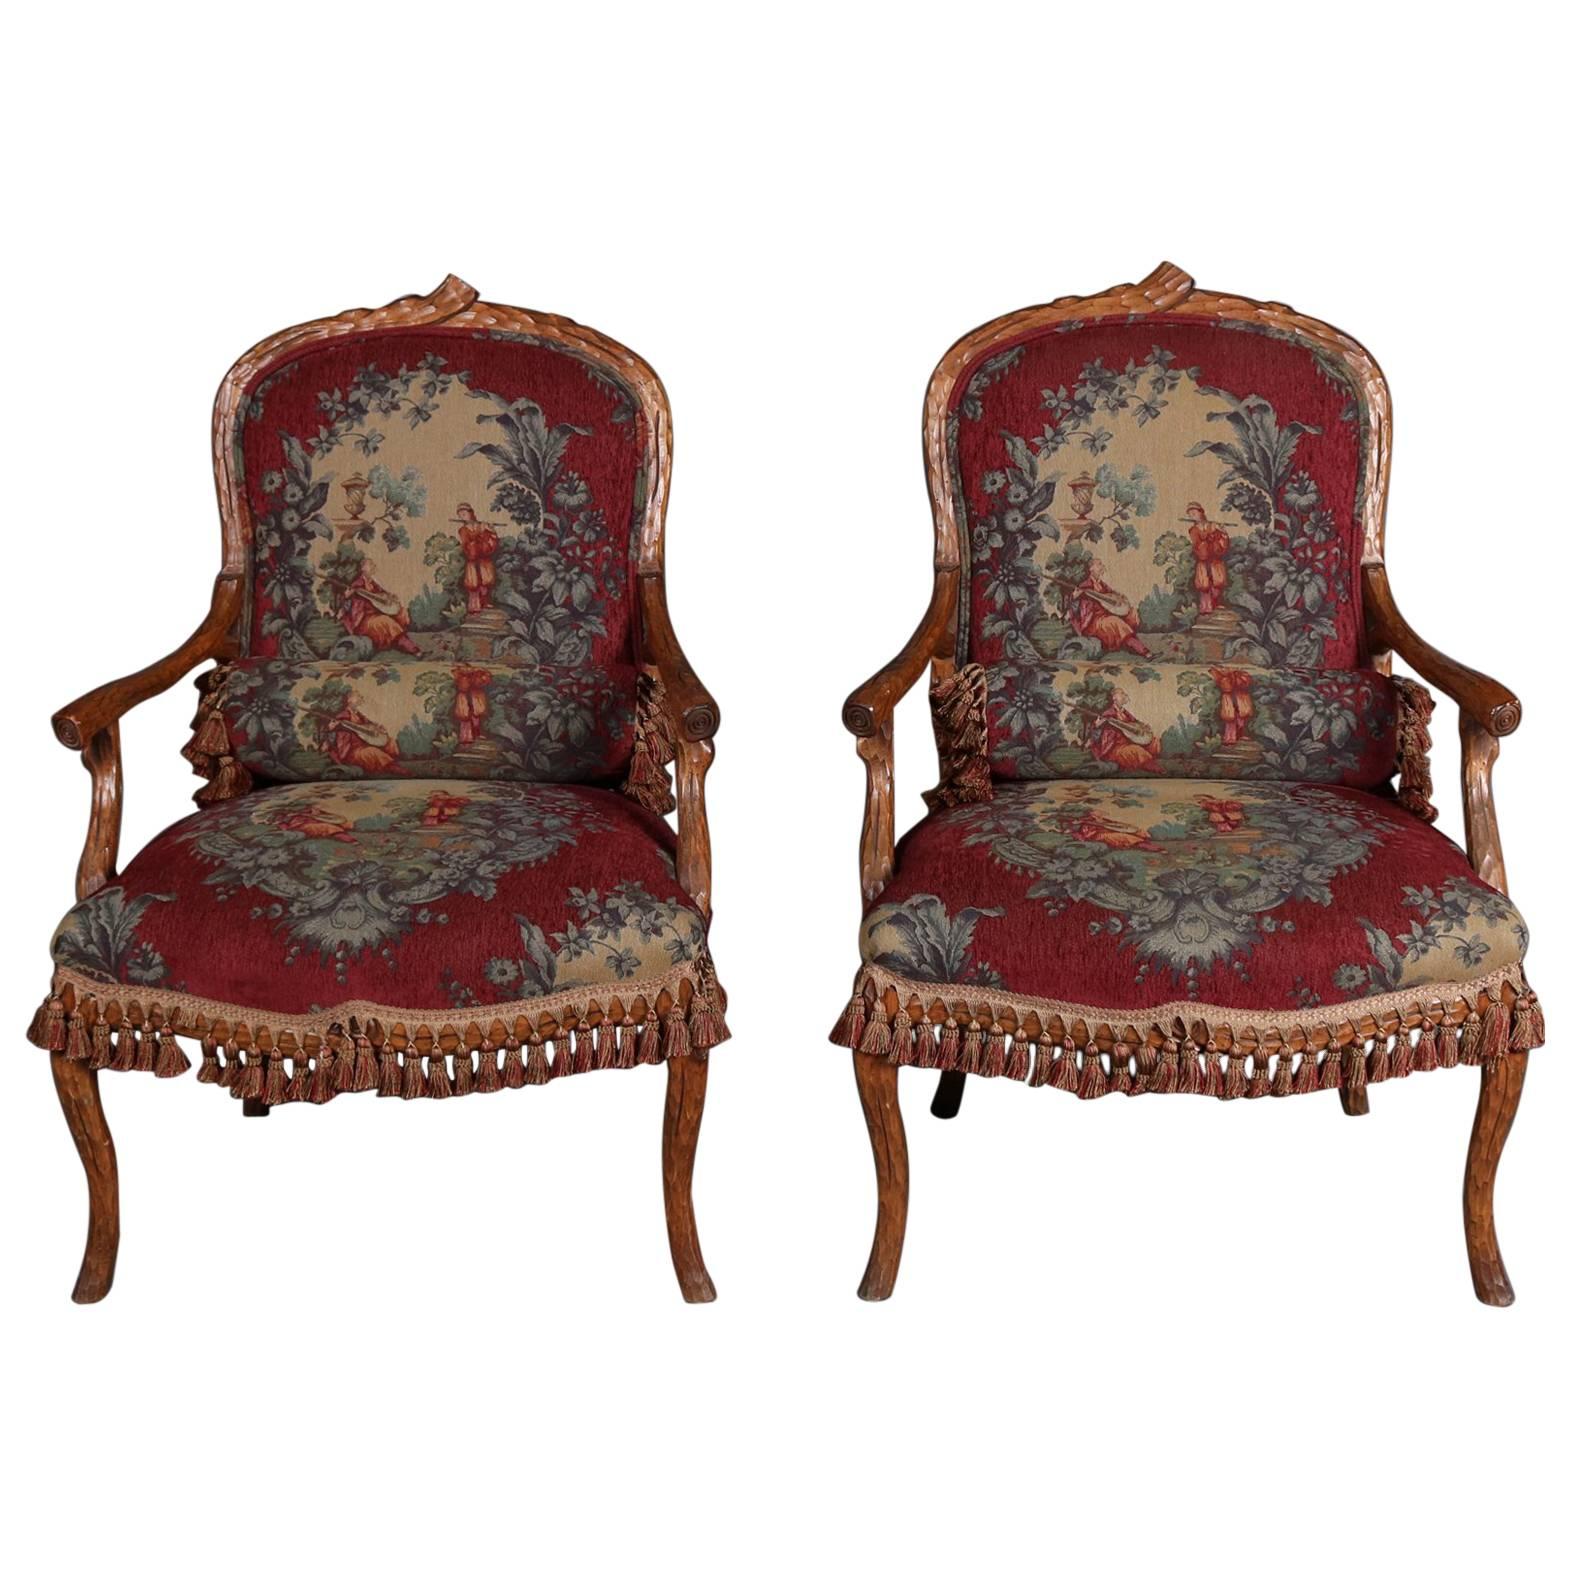 Pair of Antique Carved Walnut and Tapestry Stick Form Armchairs, 19th Century